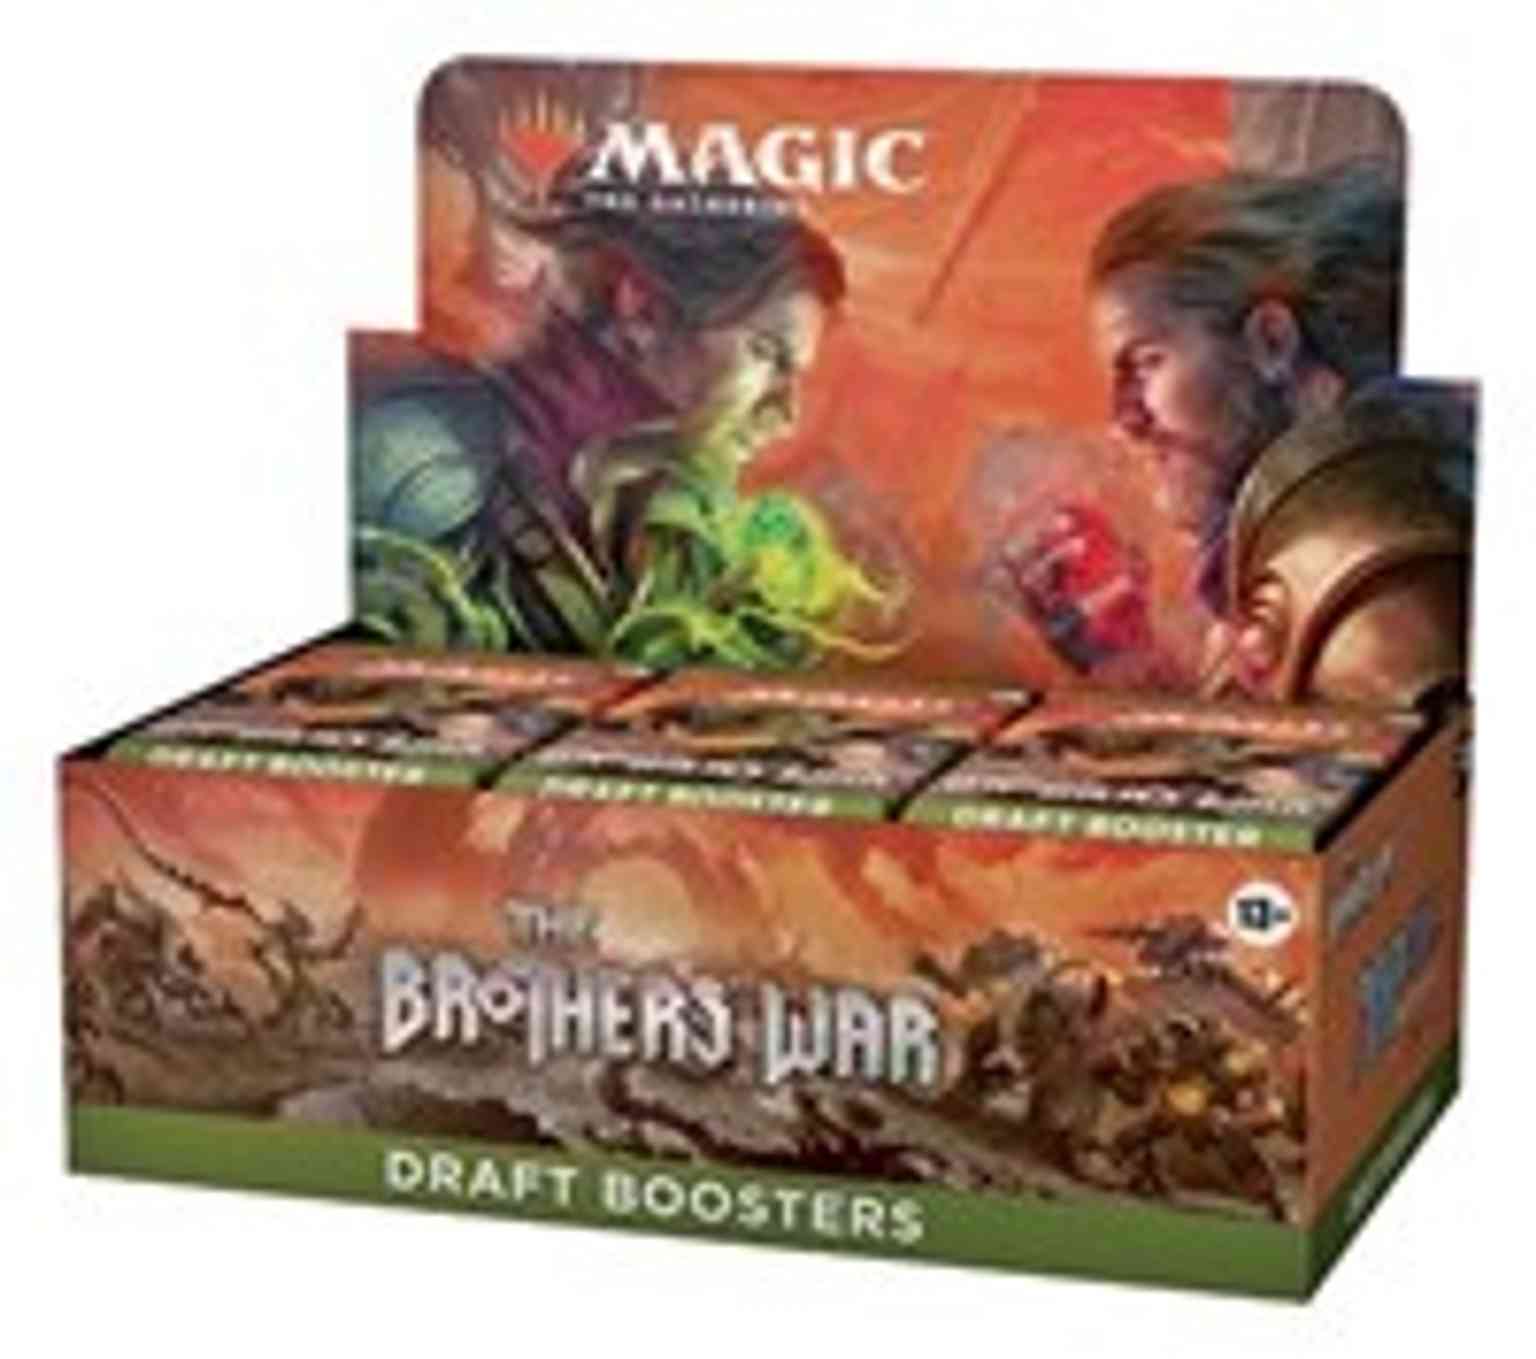 The Brothers' War - Draft Booster Box magic card front